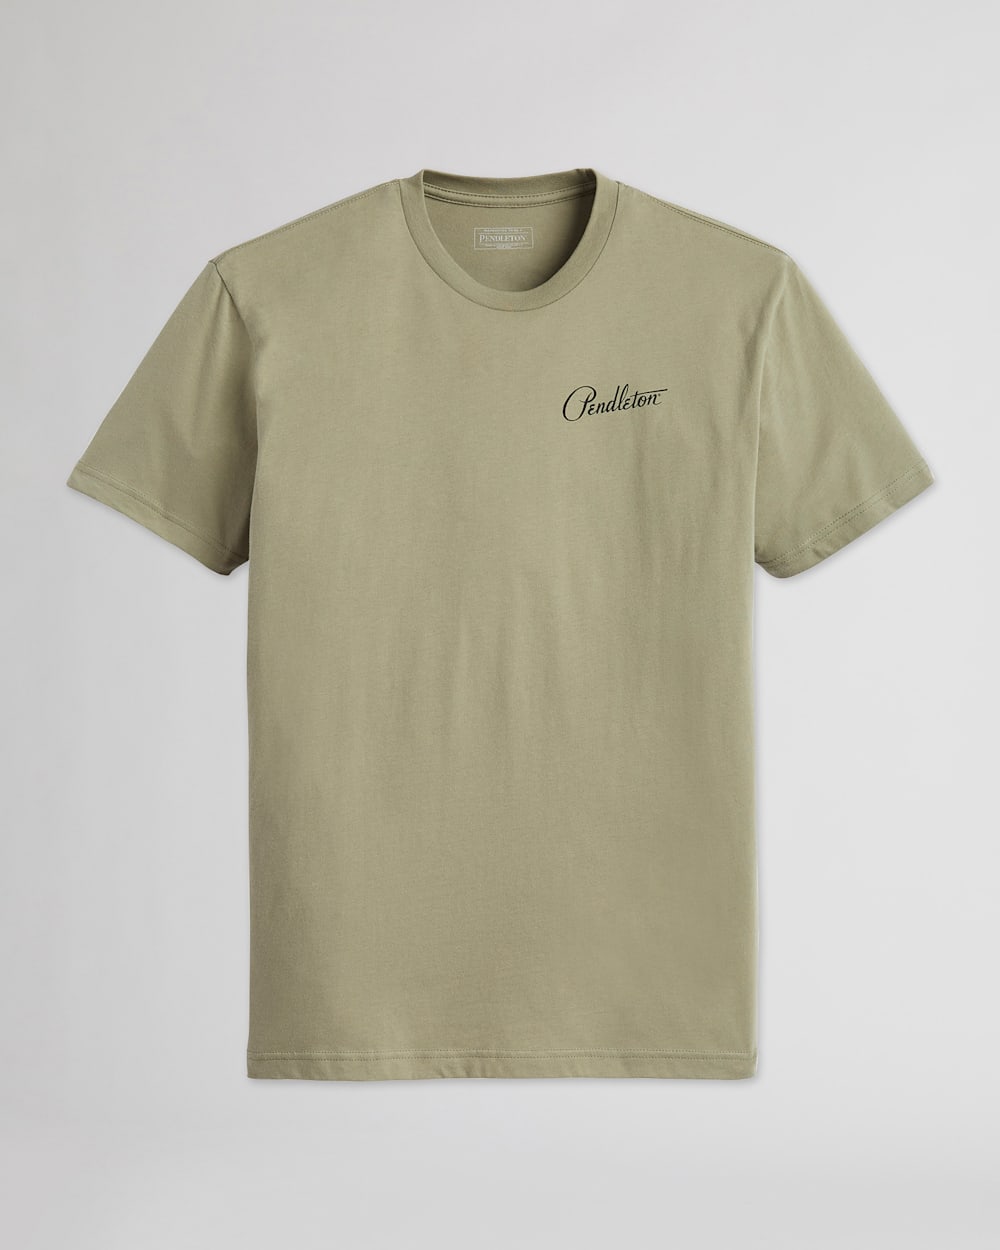 ALTERNATE VIEW OF MEN'S BISON HEAD GRAPHIC TEE IN LIGHT OLIVE/MULTI image number 6